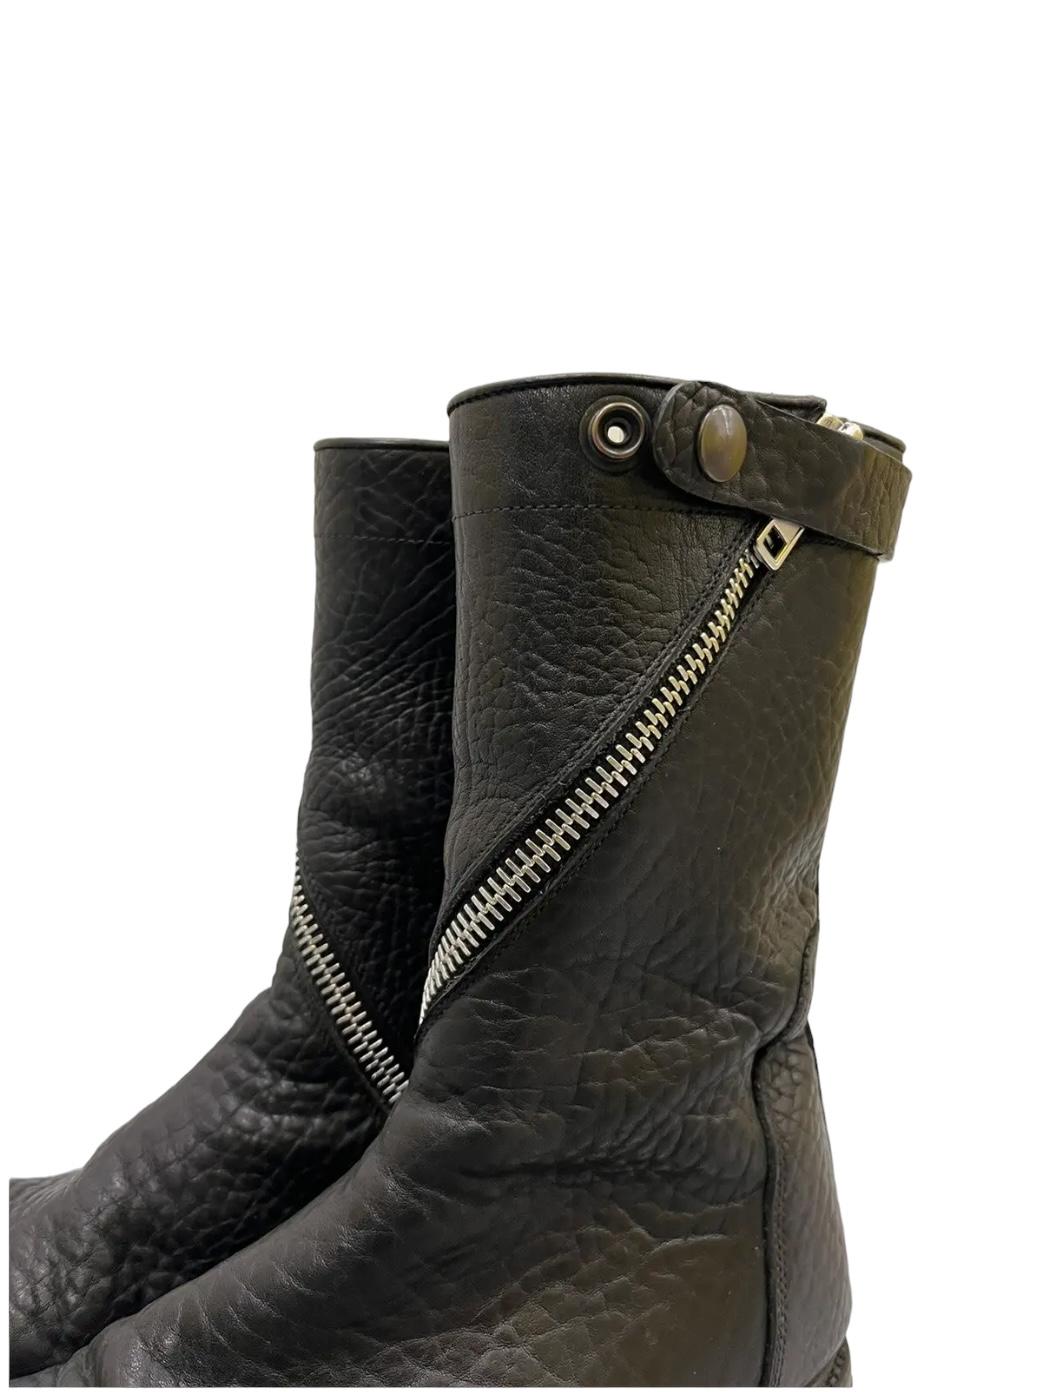 Rick Owens FW 11 Limo Spiral Leather Zip Boots For Sale 2